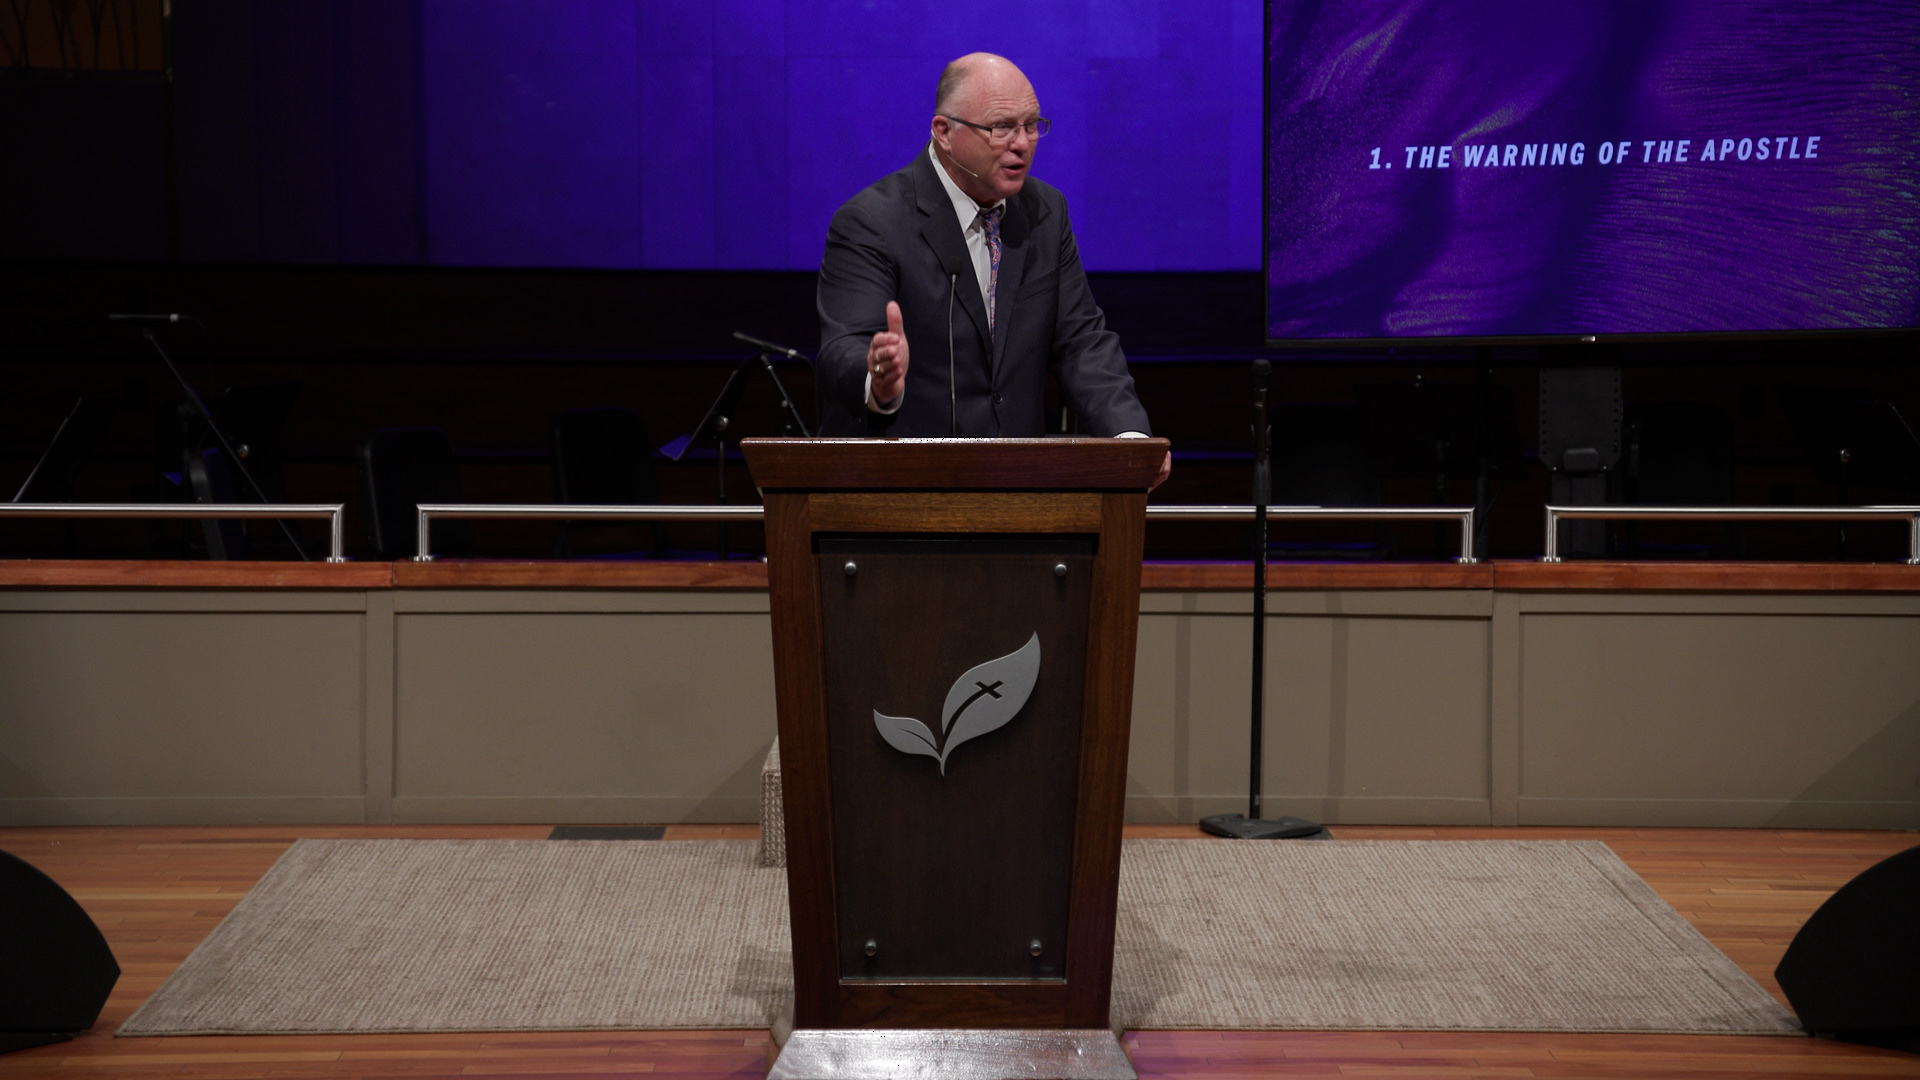 Pastor Paul Chappell: Victory Over Apostasy